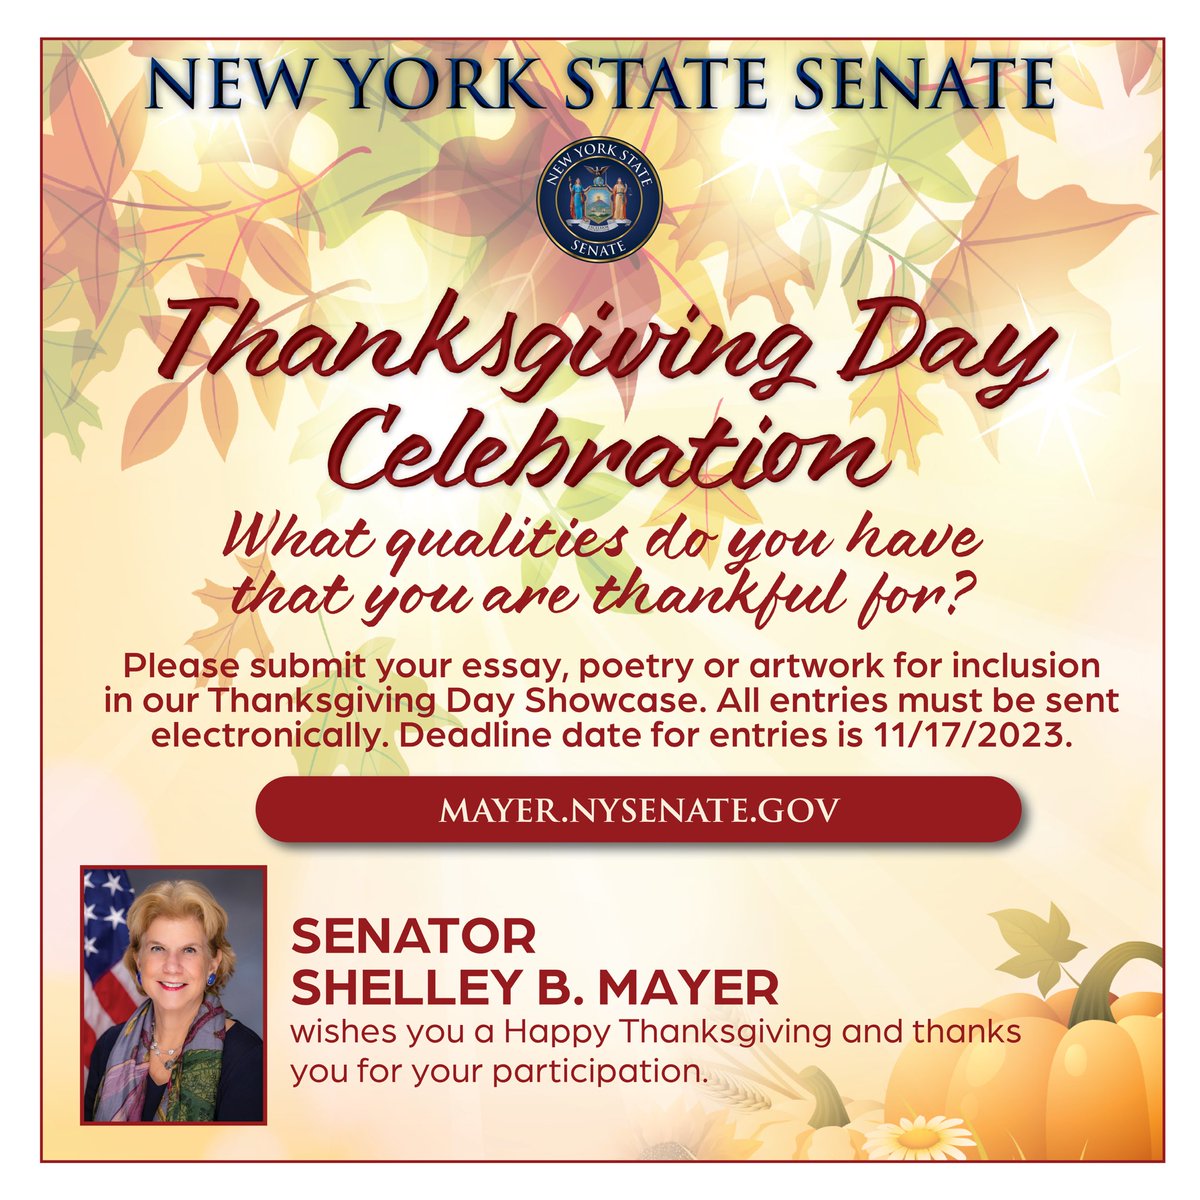 What are you thankful for this year? If you would like to participate in the NYS Senate Thanksgiving Showcase, please submit your essay, poetry or artwork electronically to mayer.senate.gov by November 17, 2023.